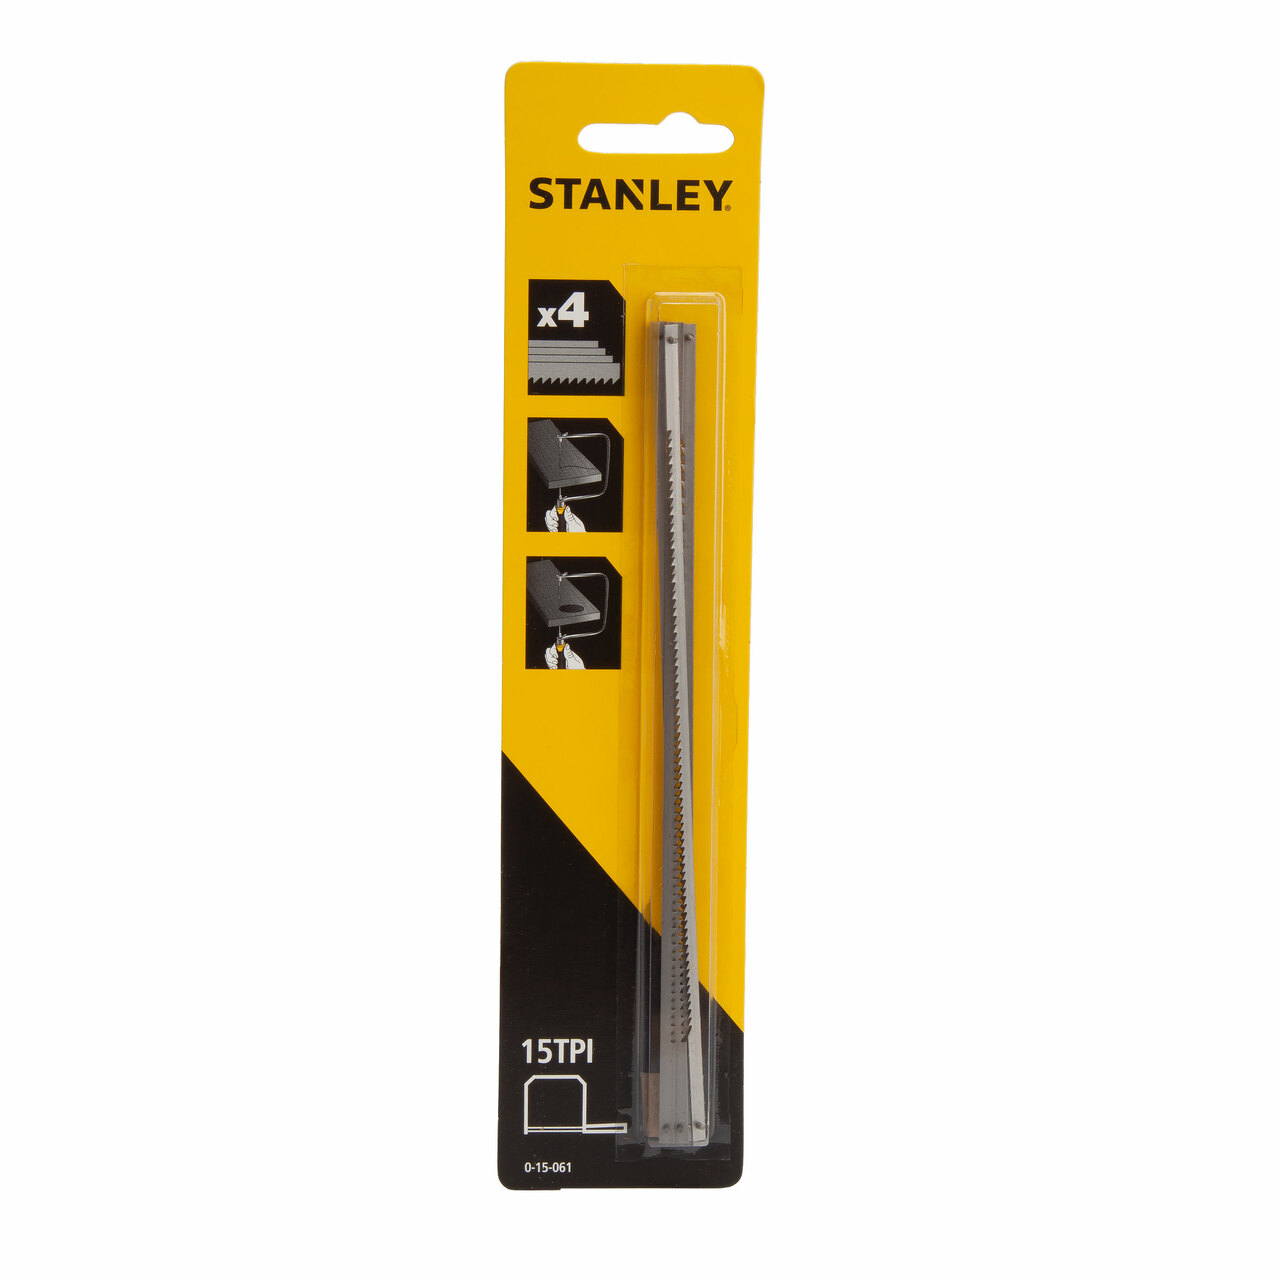 Coping Saw Blades 160mm (Pack Of 4) Stanley - 2